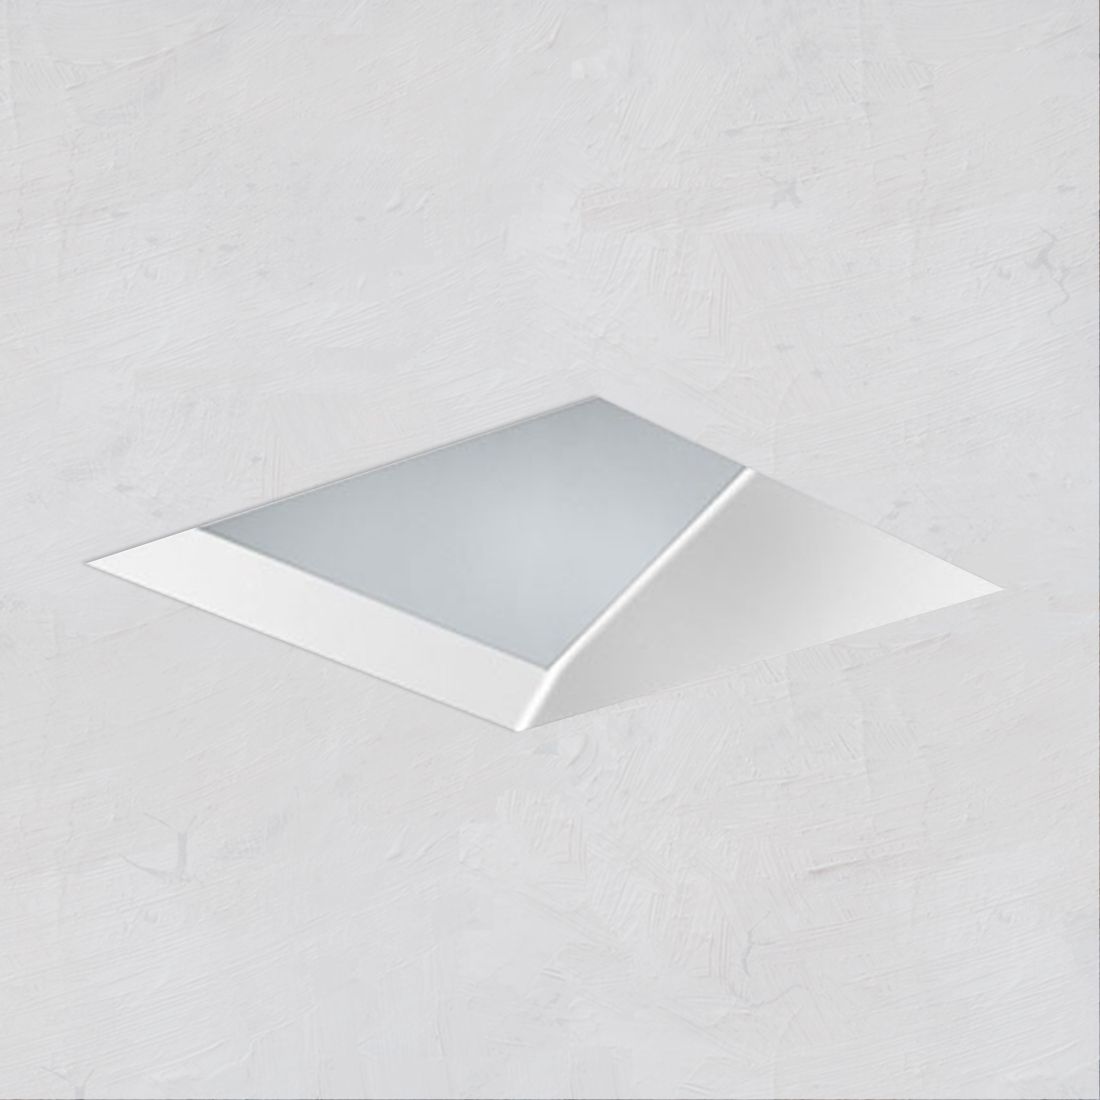 Alcon Lighting 14006 3 Illusione Inch, 3 Inch Recessed Lighting Led